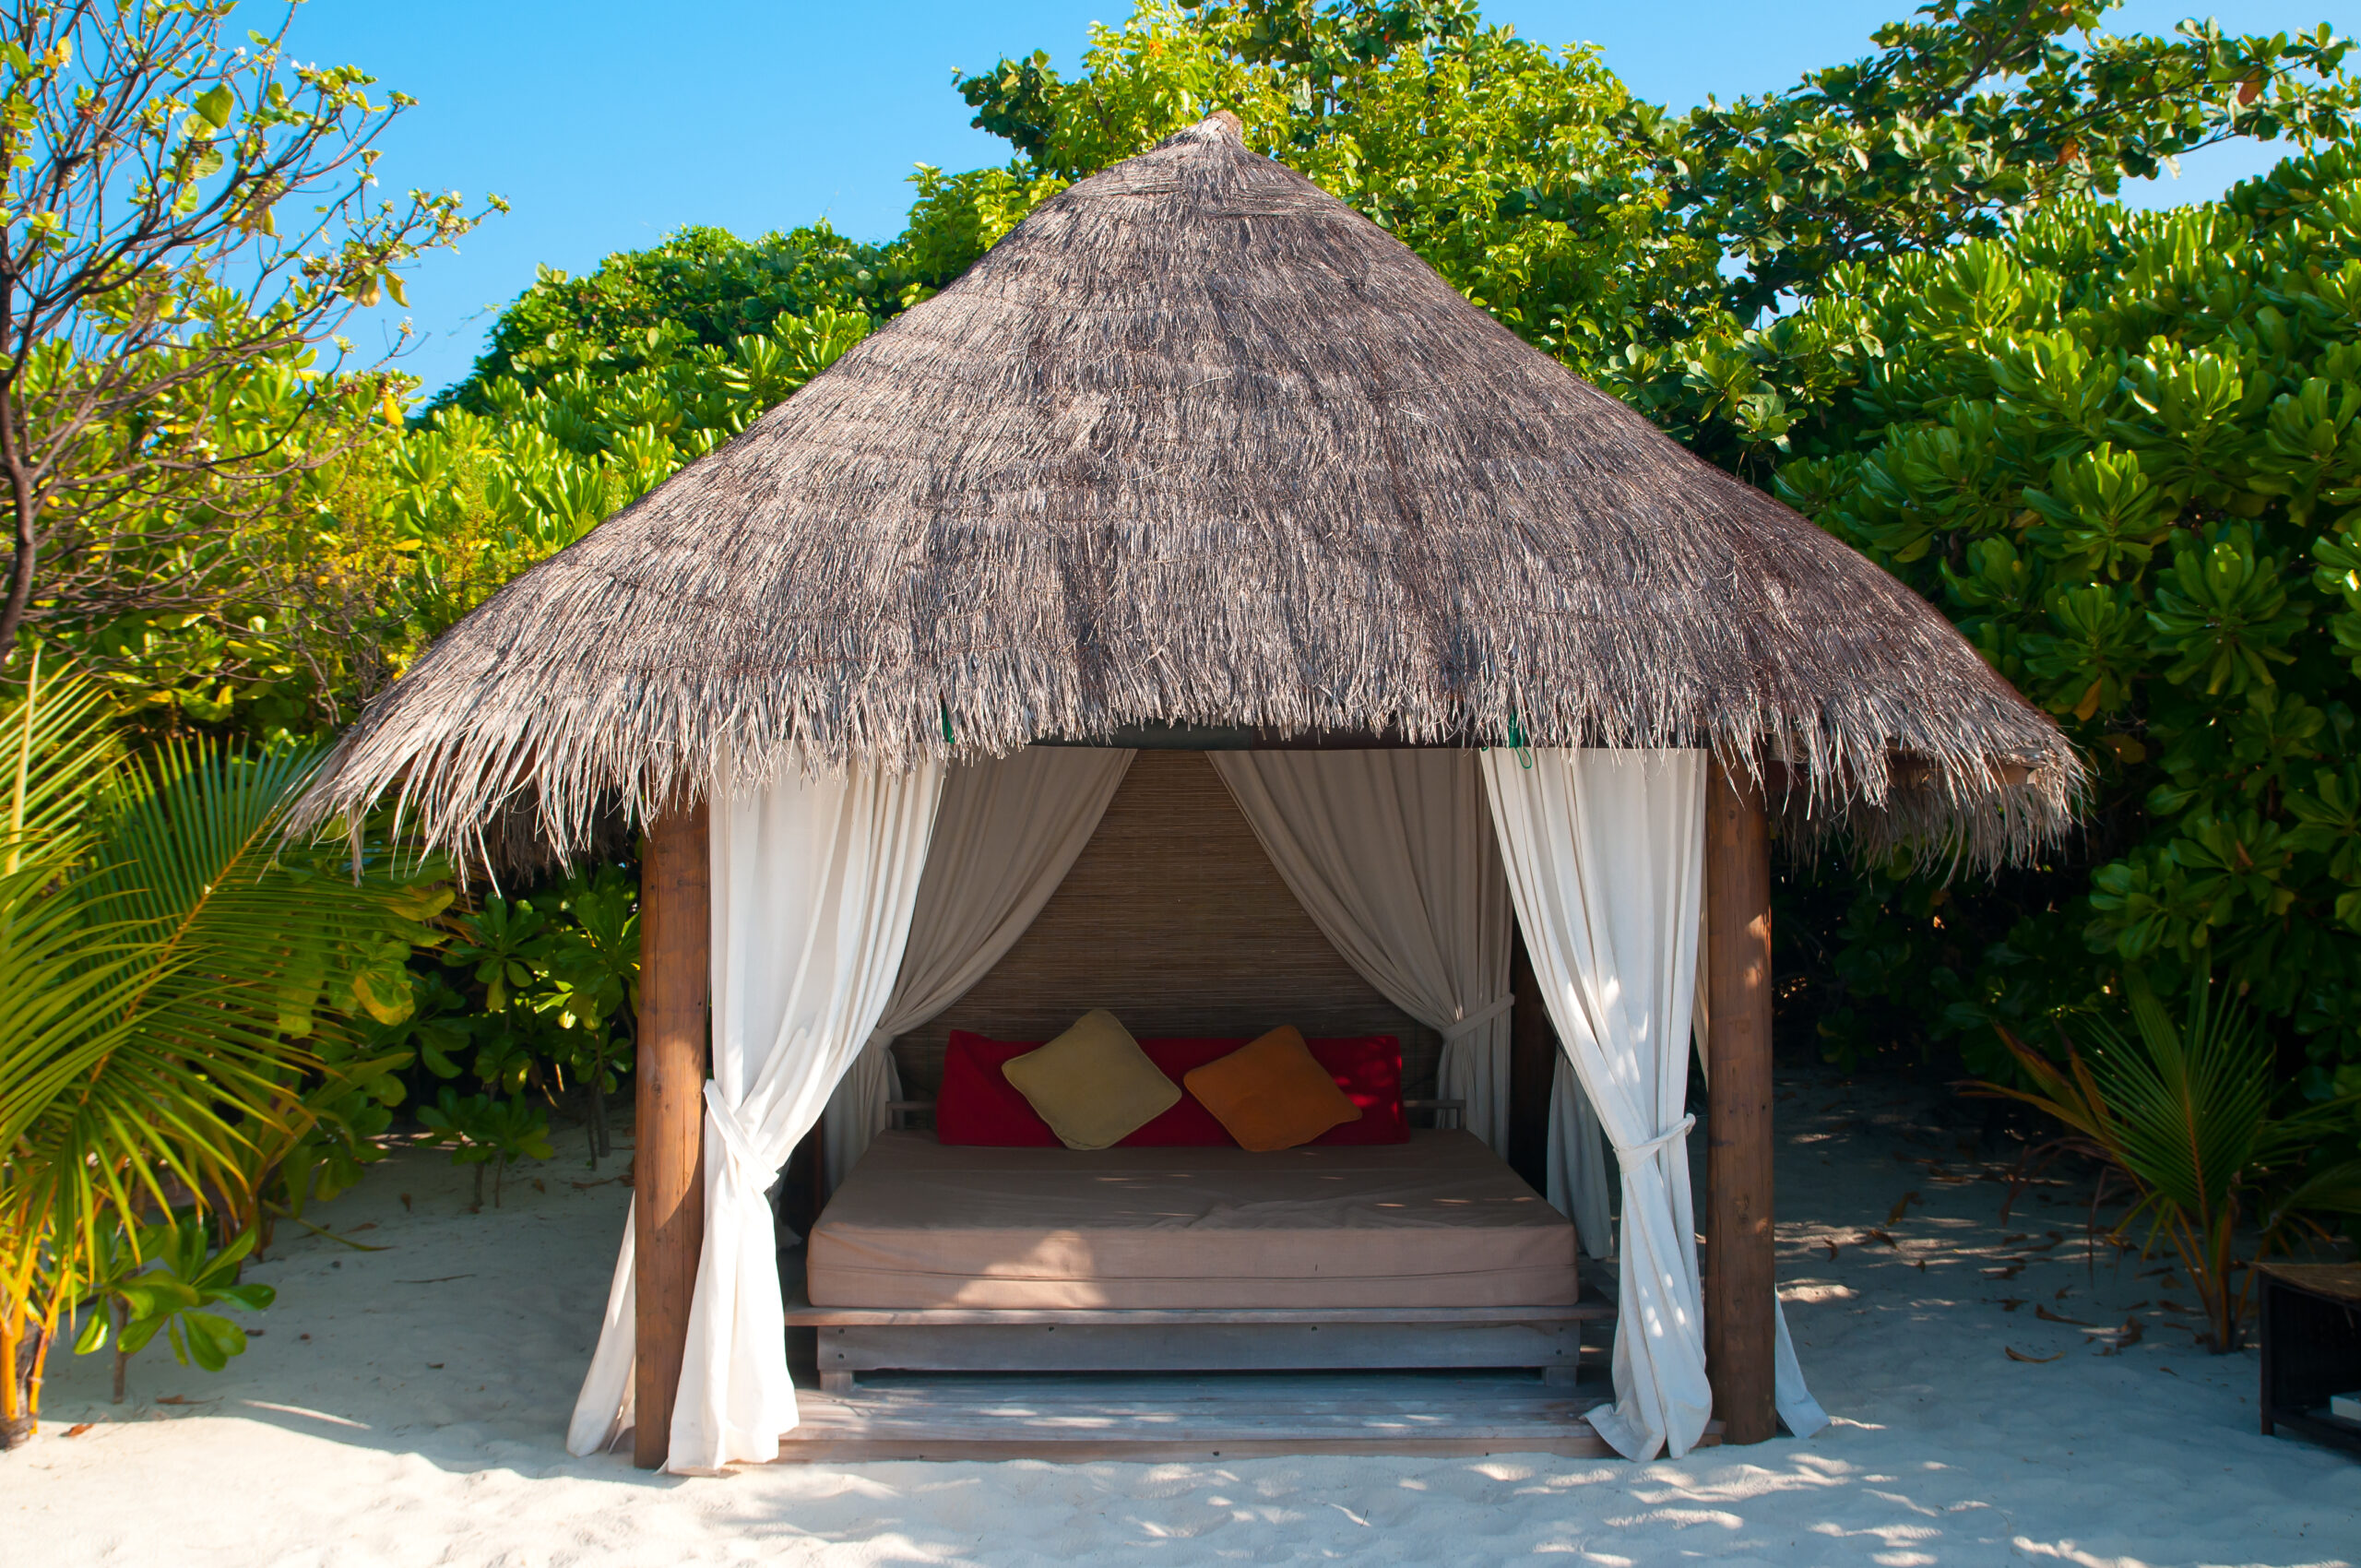  A quaint, small cabana with a thatched roof and a few lounge chairs